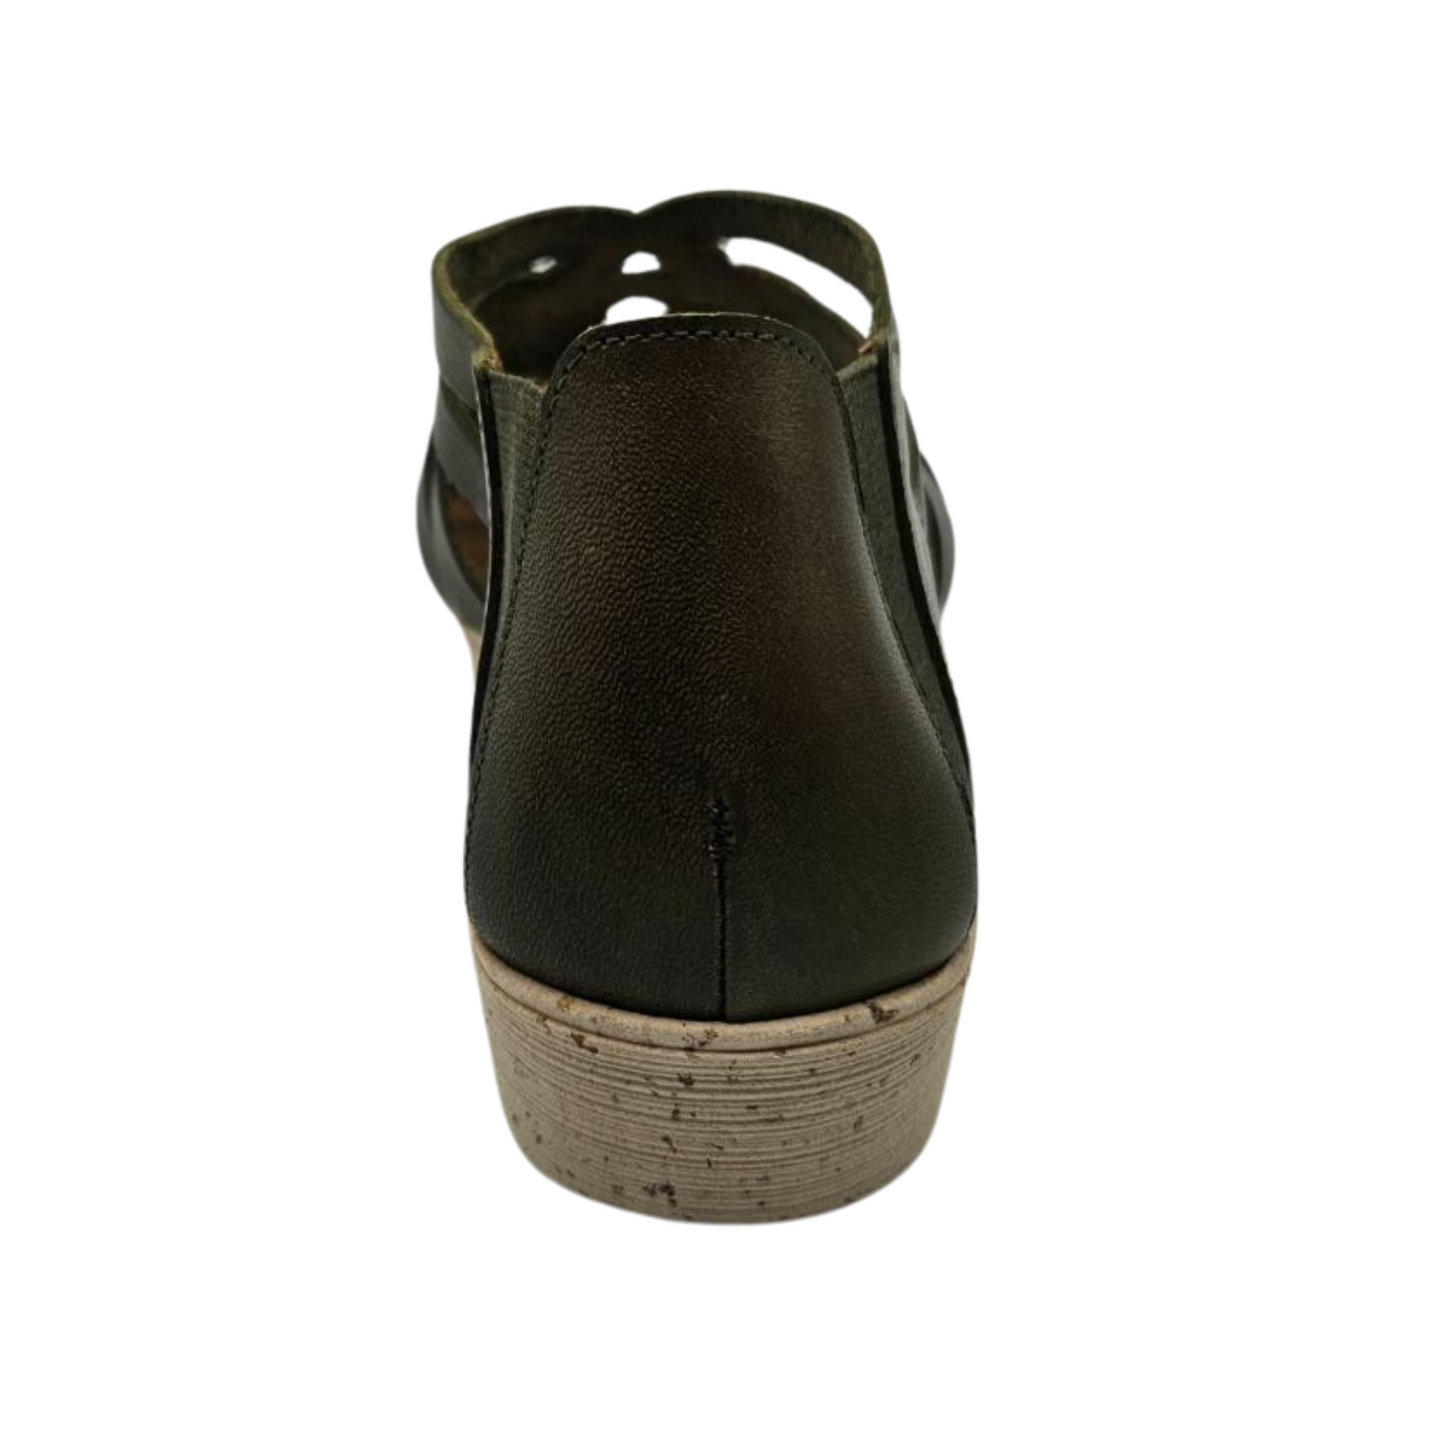 Back view of olive green leather sandal with a cutout design, slight wedge heel and leather lined footbed